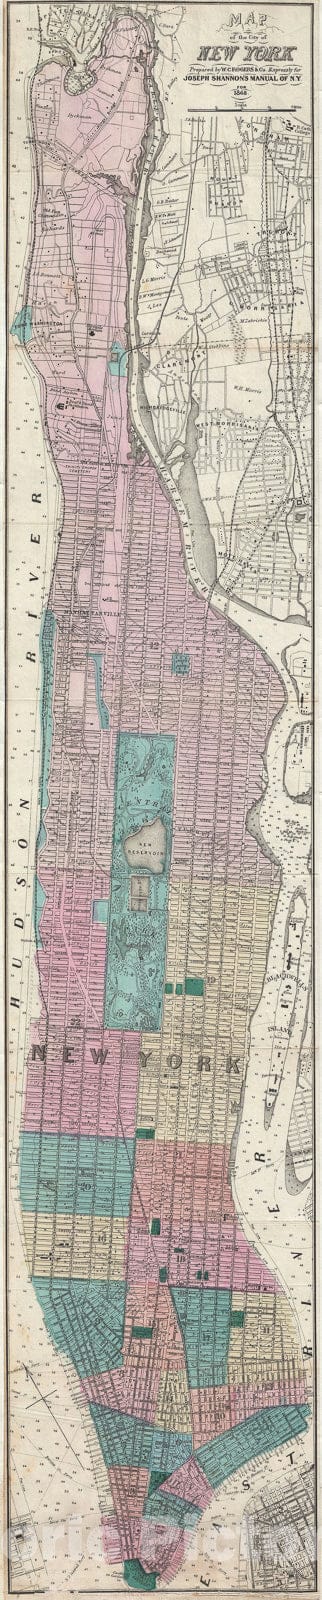 Historic Map : New York City "Manhattan", Shannon and Rogers, 1868, Vintage Wall Art